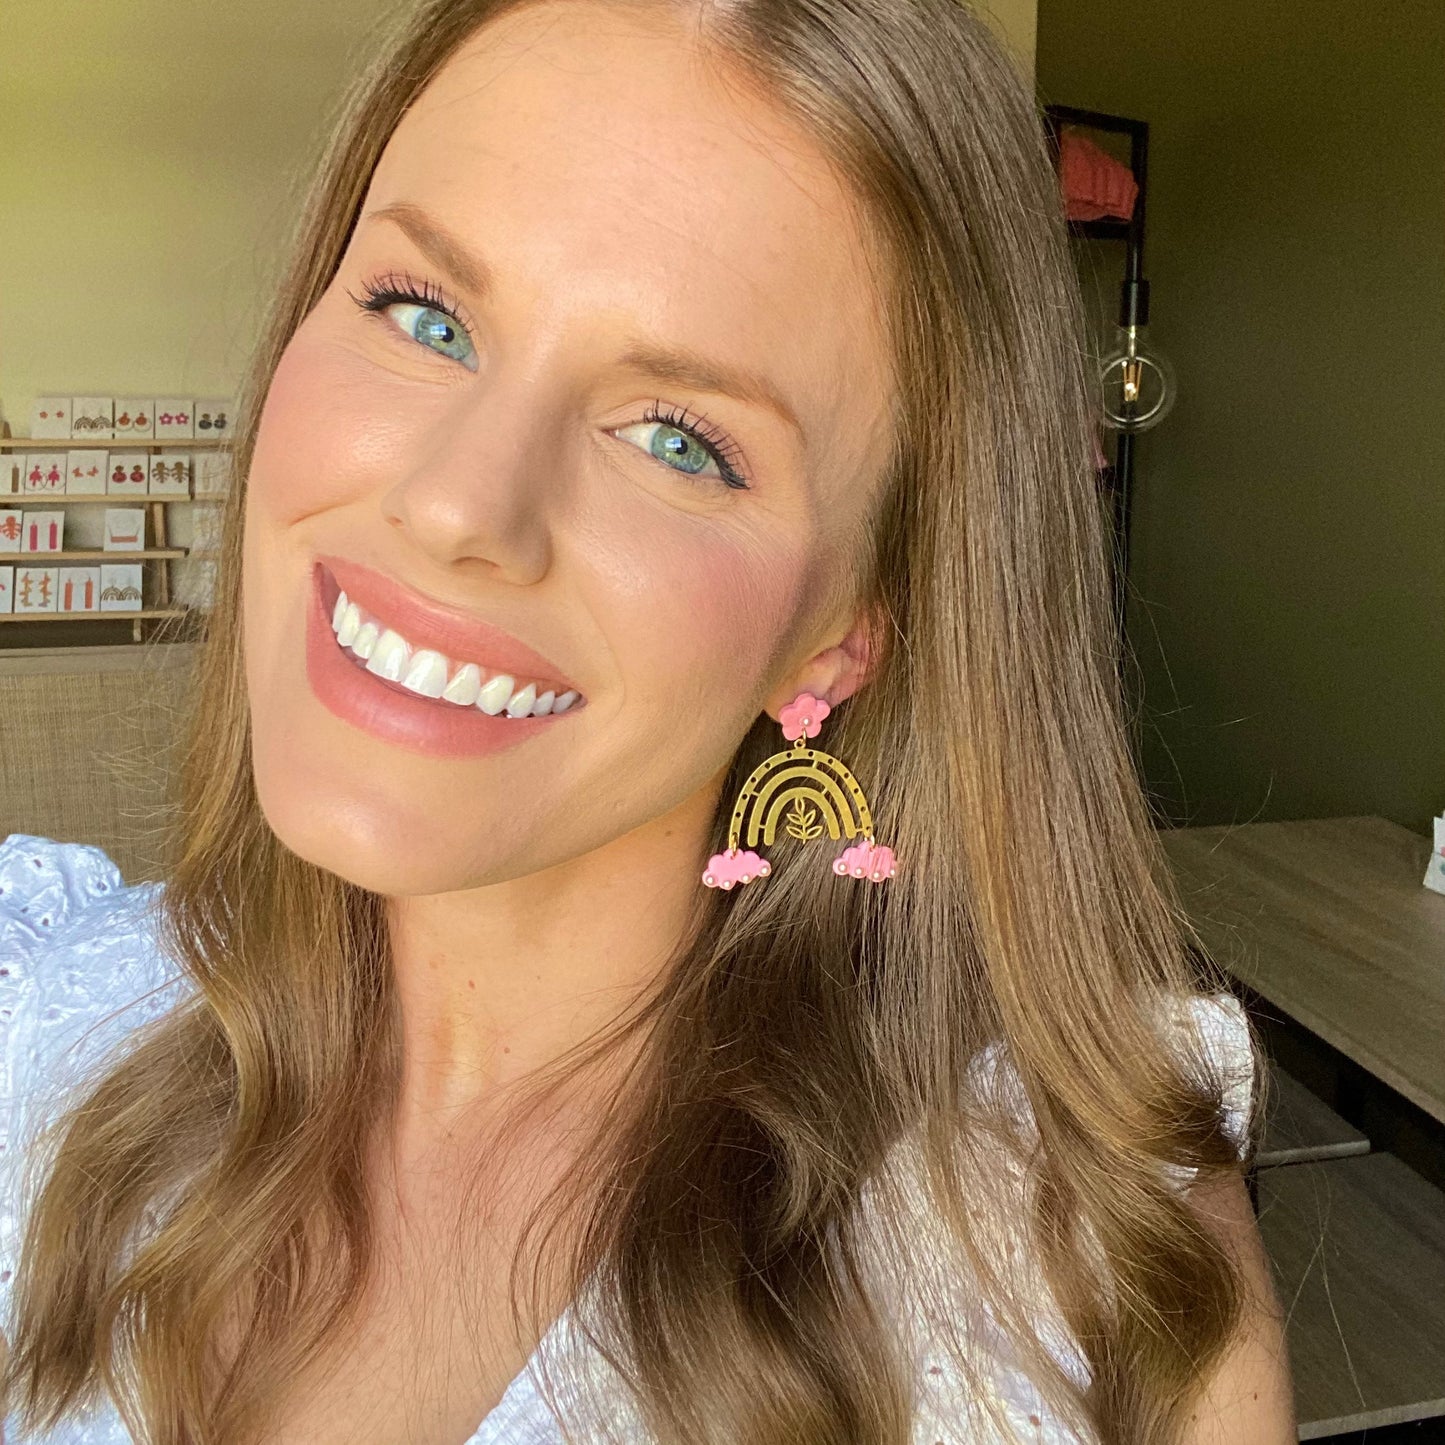 The Roxi | Flower, Pearl, and Rainbow Clay Earrings